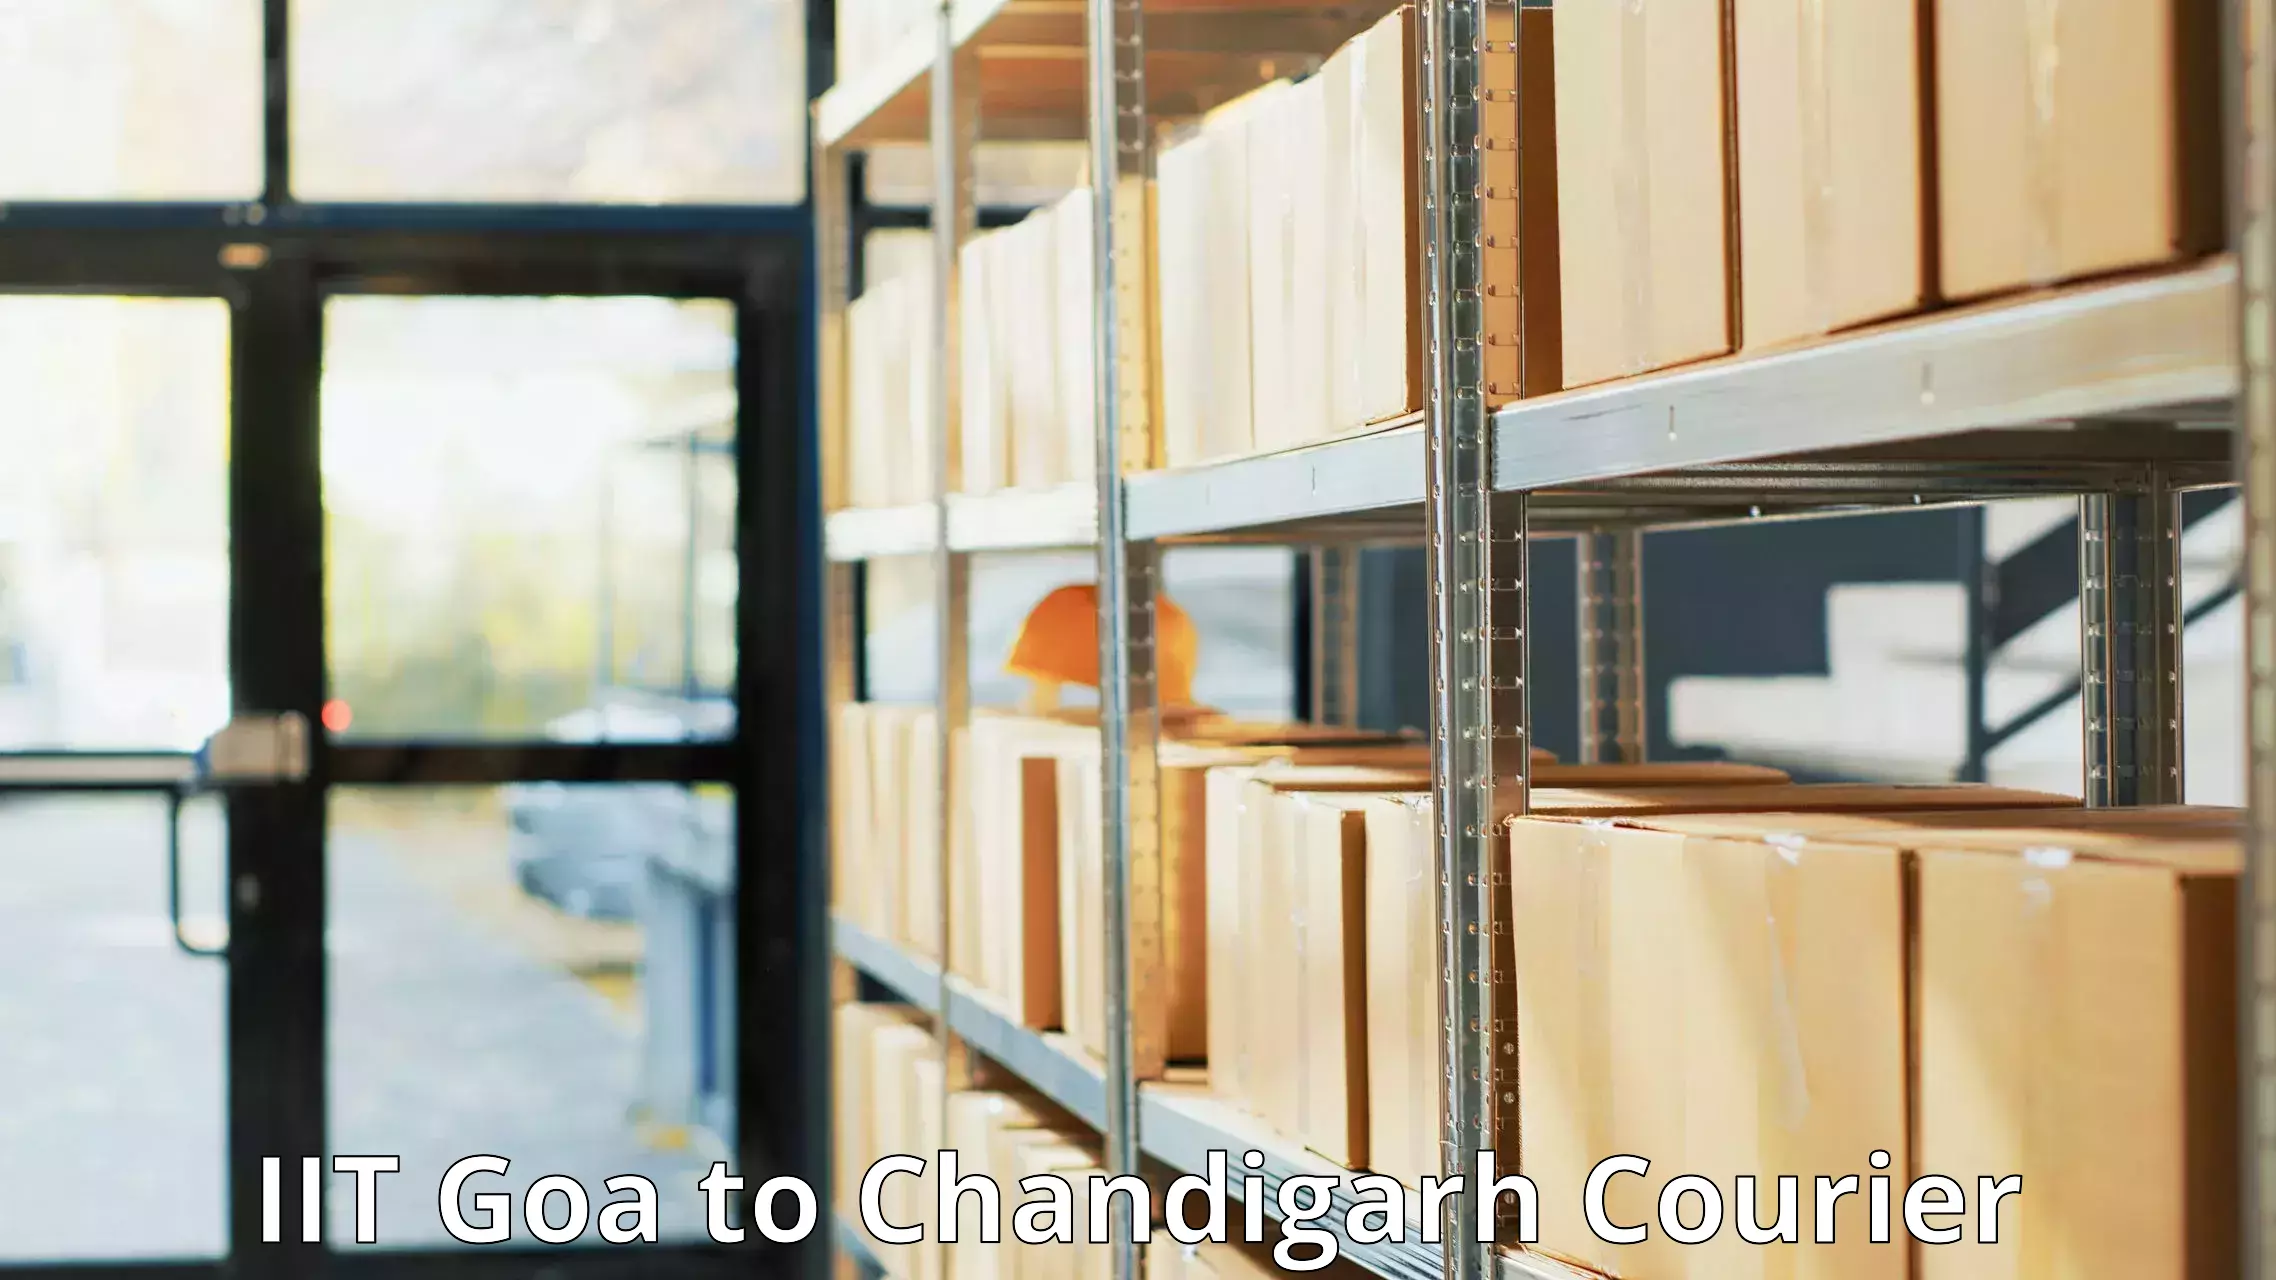 Delivery service partnership IIT Goa to Chandigarh